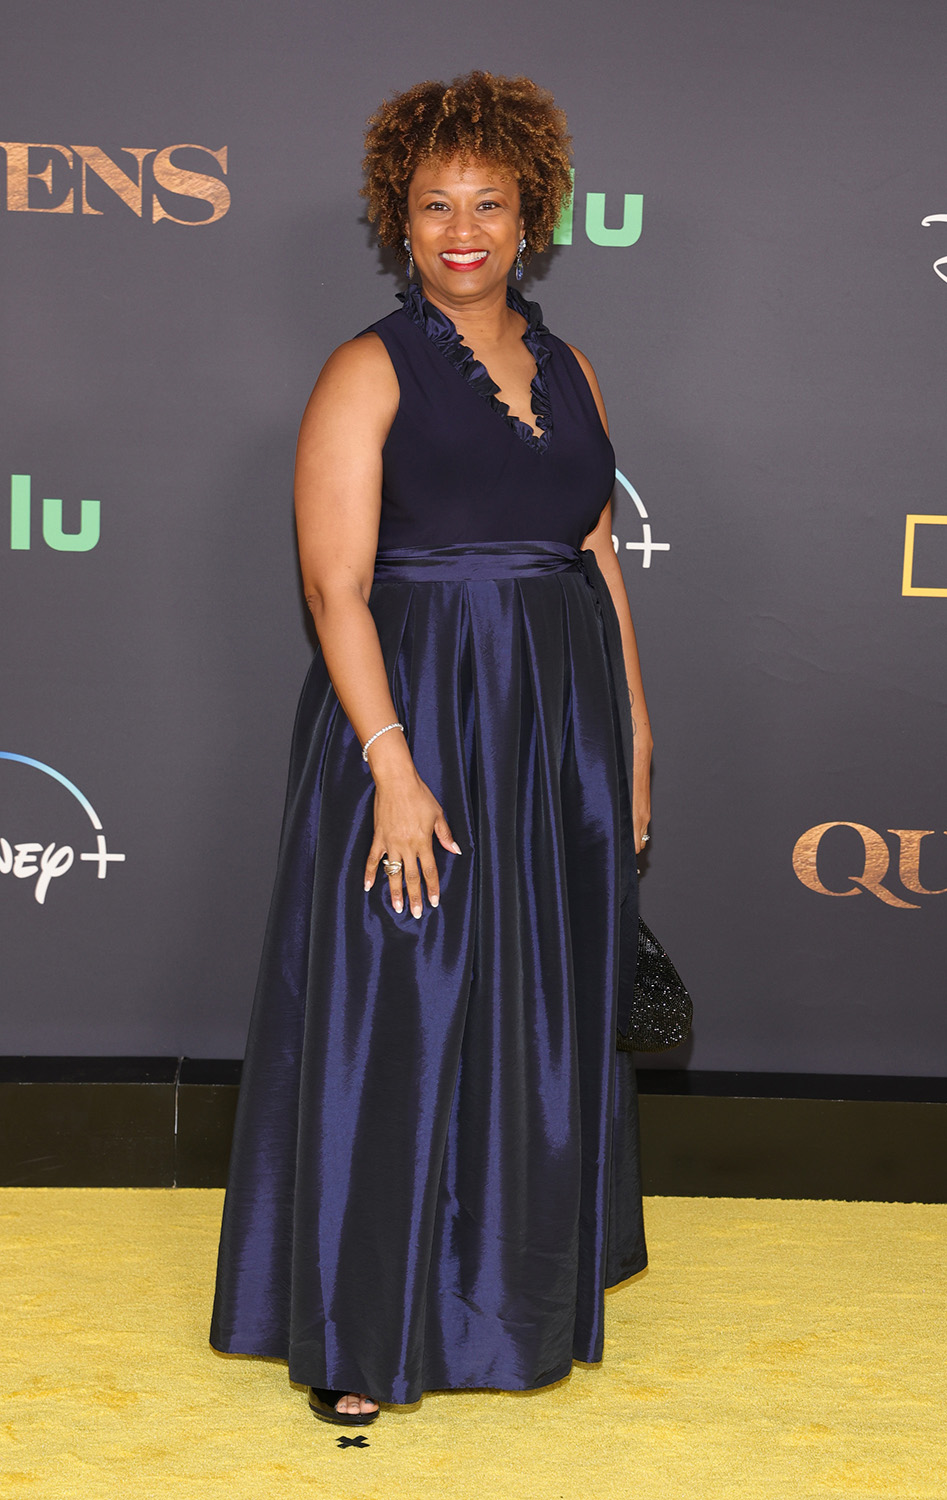 Karen Greenfield attends the Los Angeles premiere of National Geographic's "QUEENS" on February 8, 2024 at the Academy Museum of Motion Pictures in Los Angeles, CA